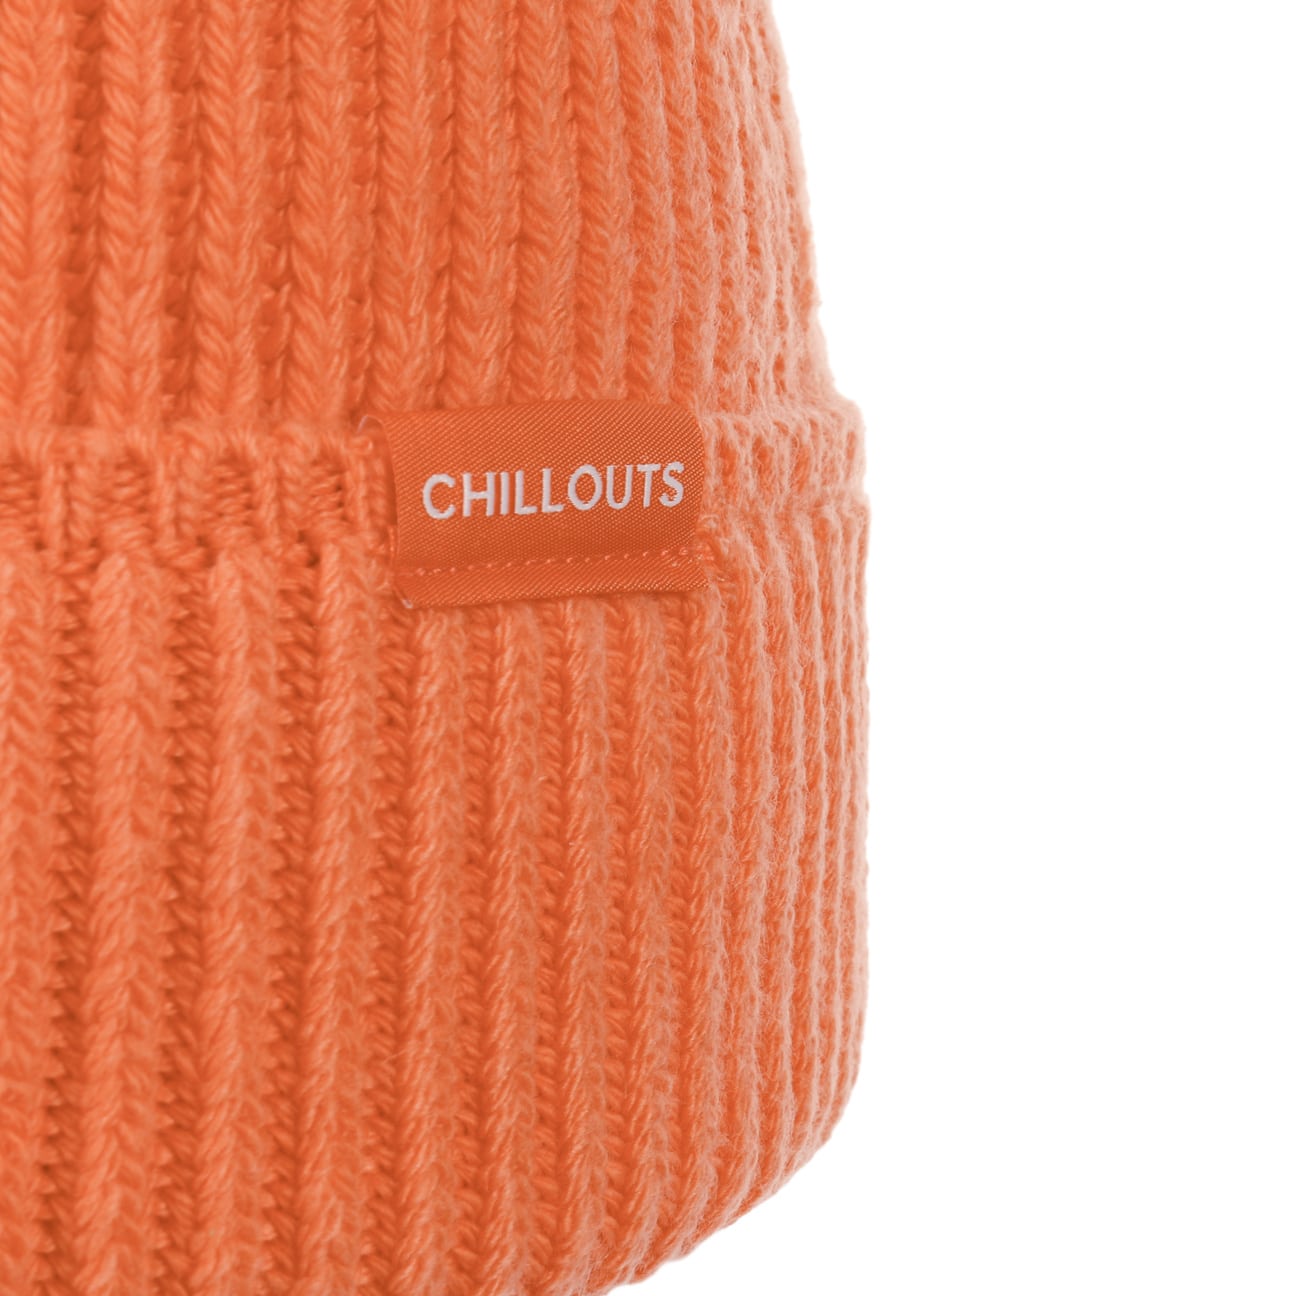 Cotton Meets Wool Umschlagmütze 29,99 € by - Chillouts